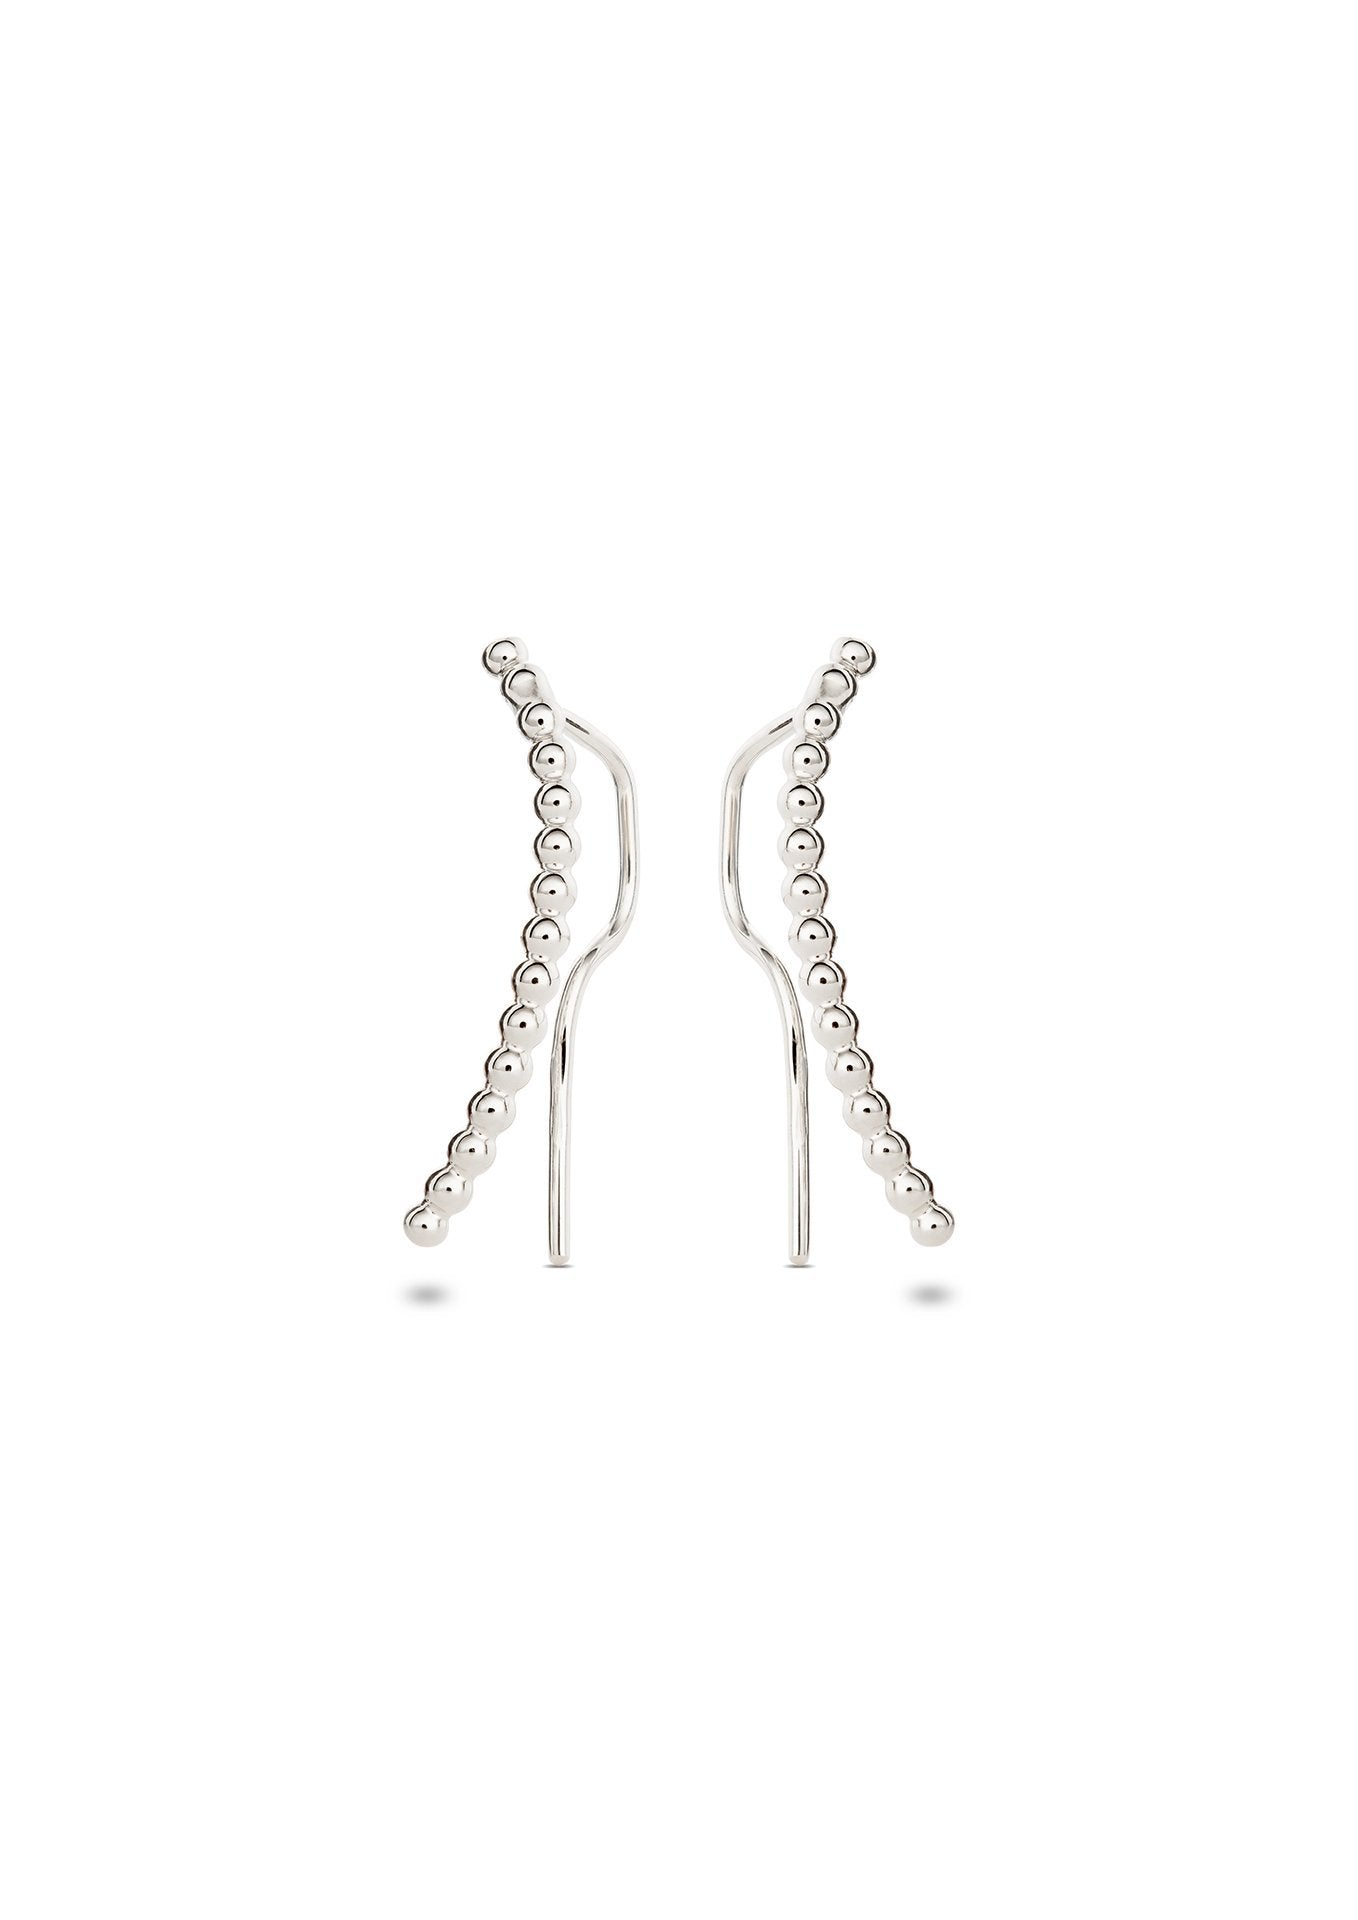 NO MORE accessories Champagne Crawlers in sterling silver 